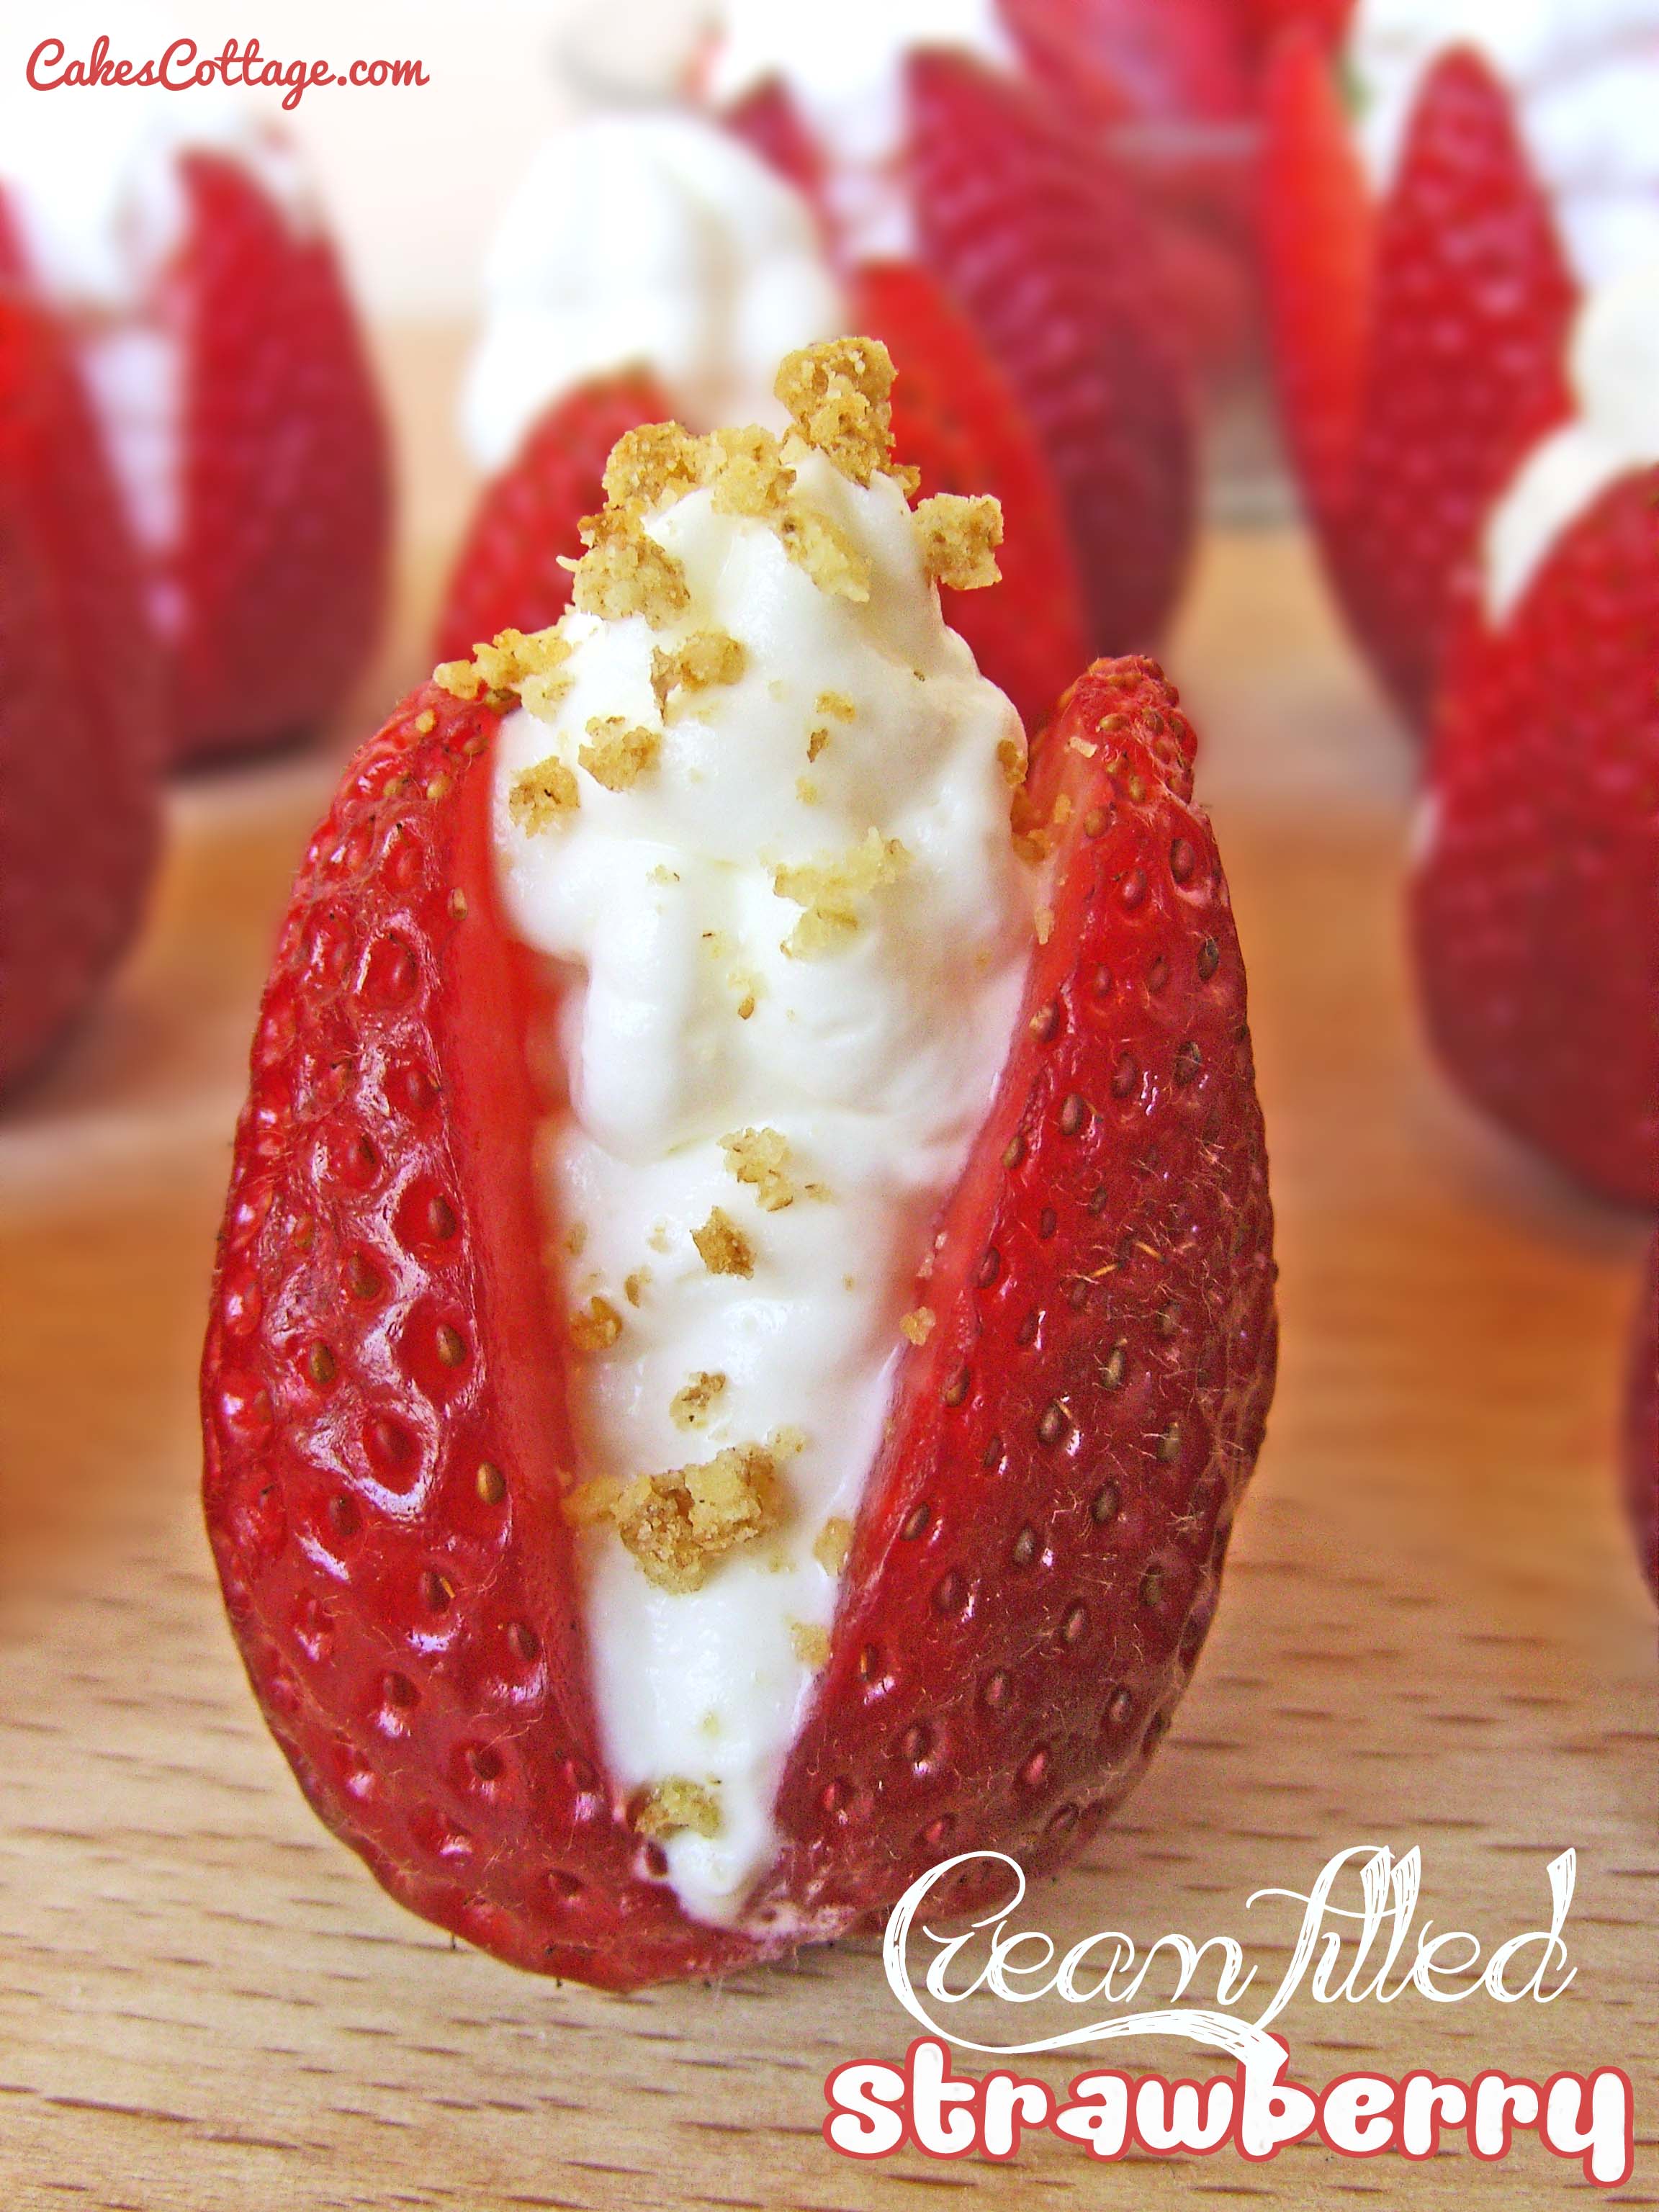 Strawberries filled with creamy cheesecake mixture.  #strawberries